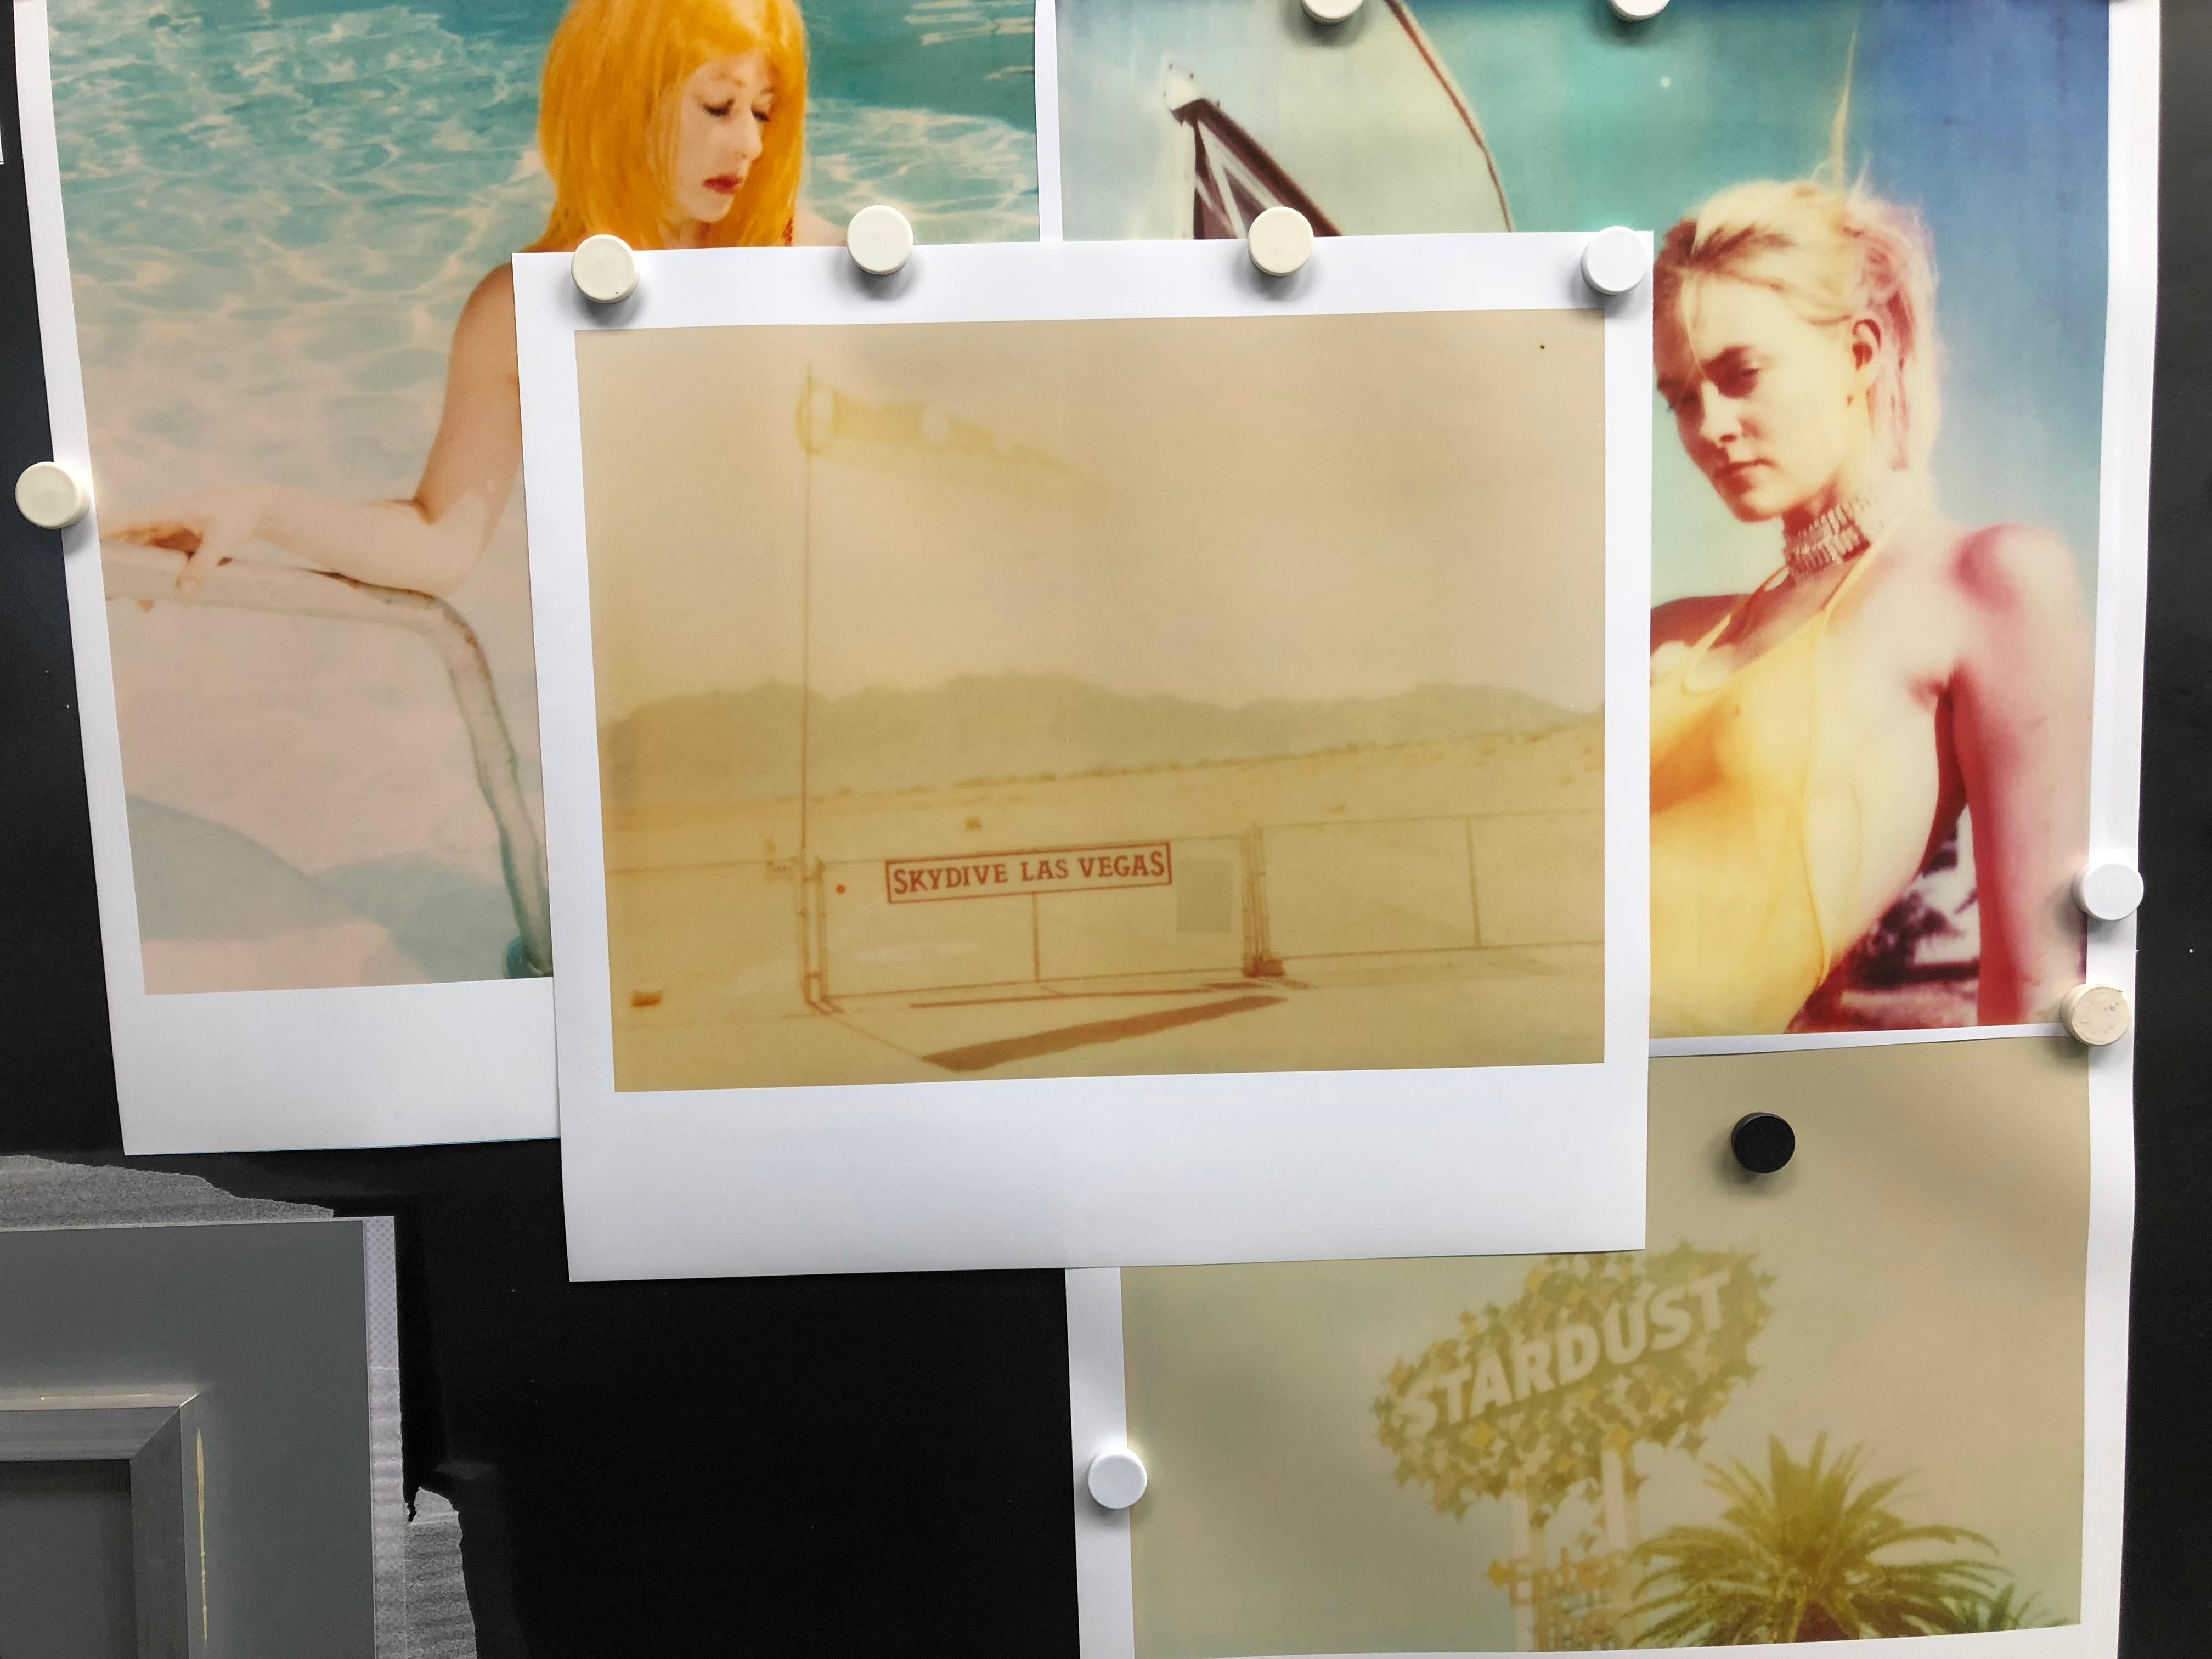 'Skydive' (Las Vegas), 1999, 50x60cm, Edition 6/10, 

Analog C-Print, hand-printed and enlarged by the artist, based on a Polaroid photograph.
Certificate and Signature label, 
artist Inventory Nr. 541.06, 
unmounted

THE GREATER THE EMPTINESS THE